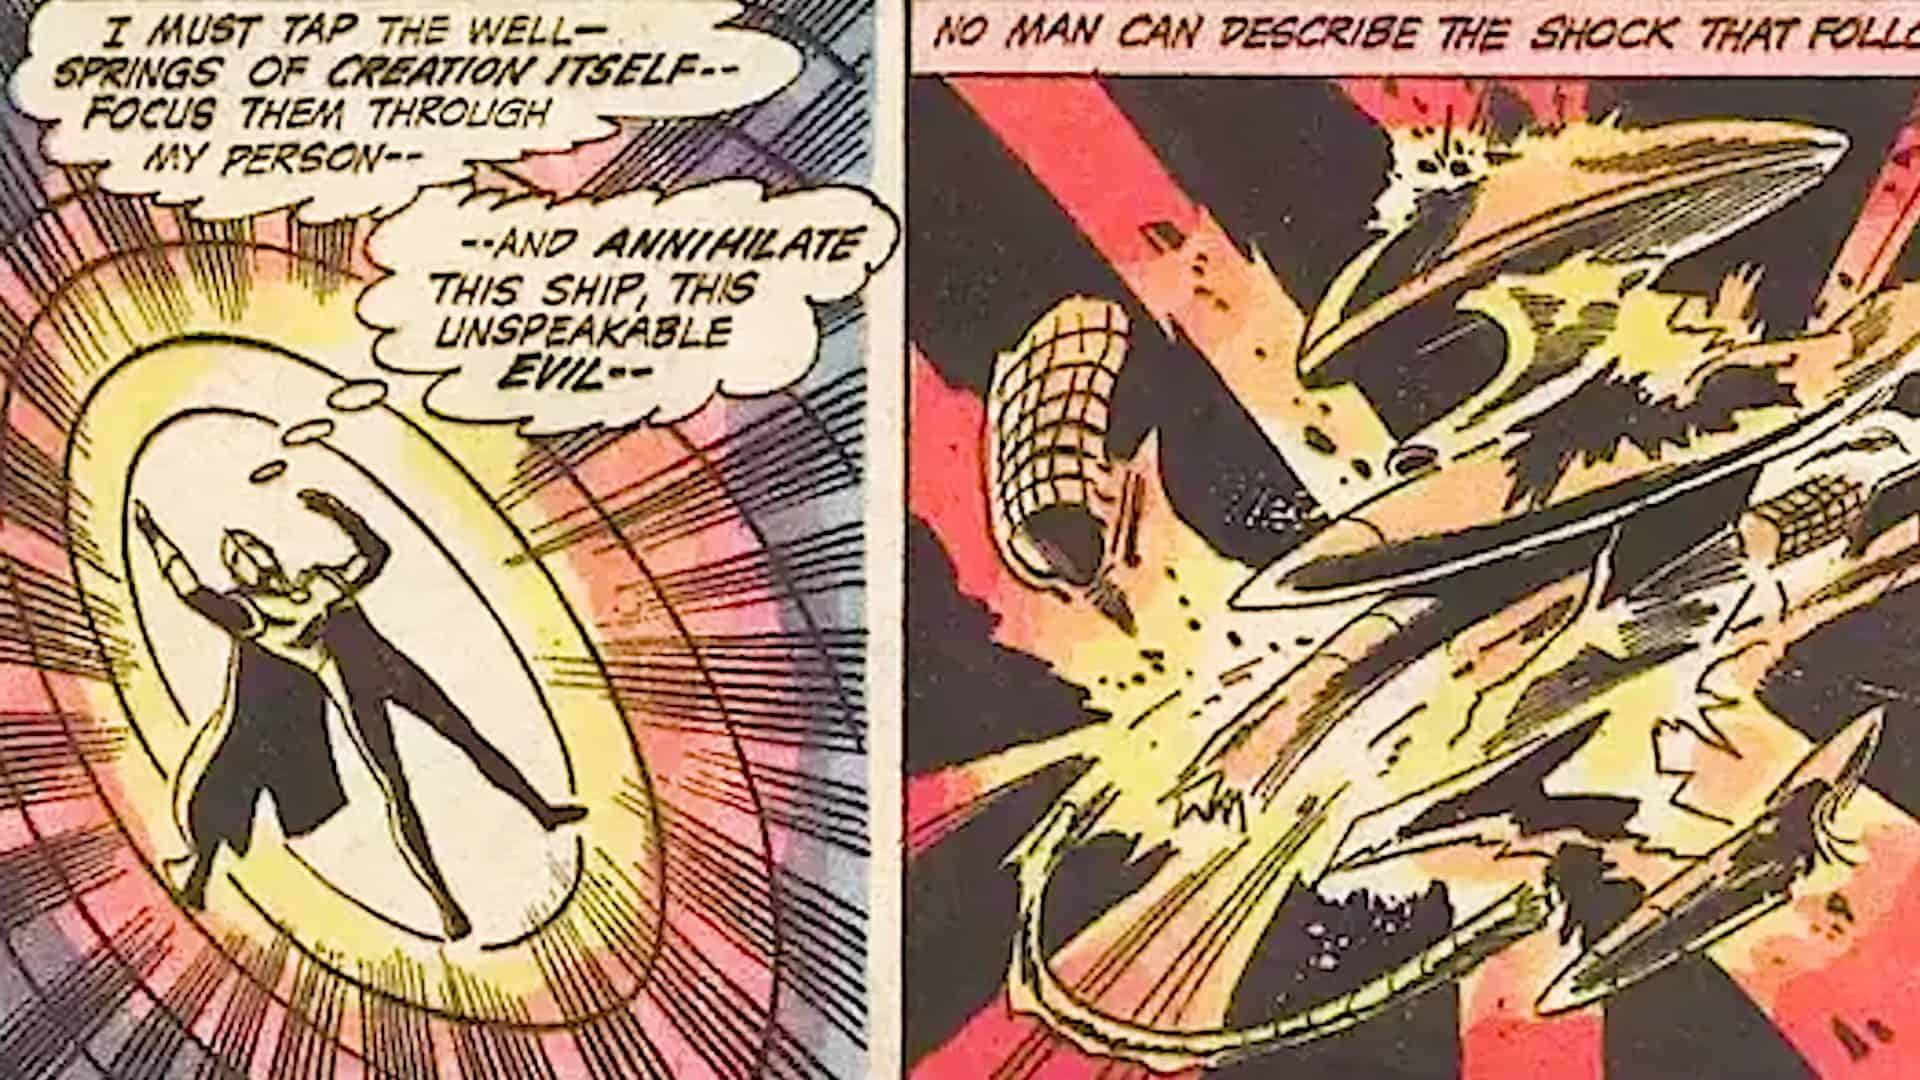 Dr. Fate was able to tap into the springs of creation